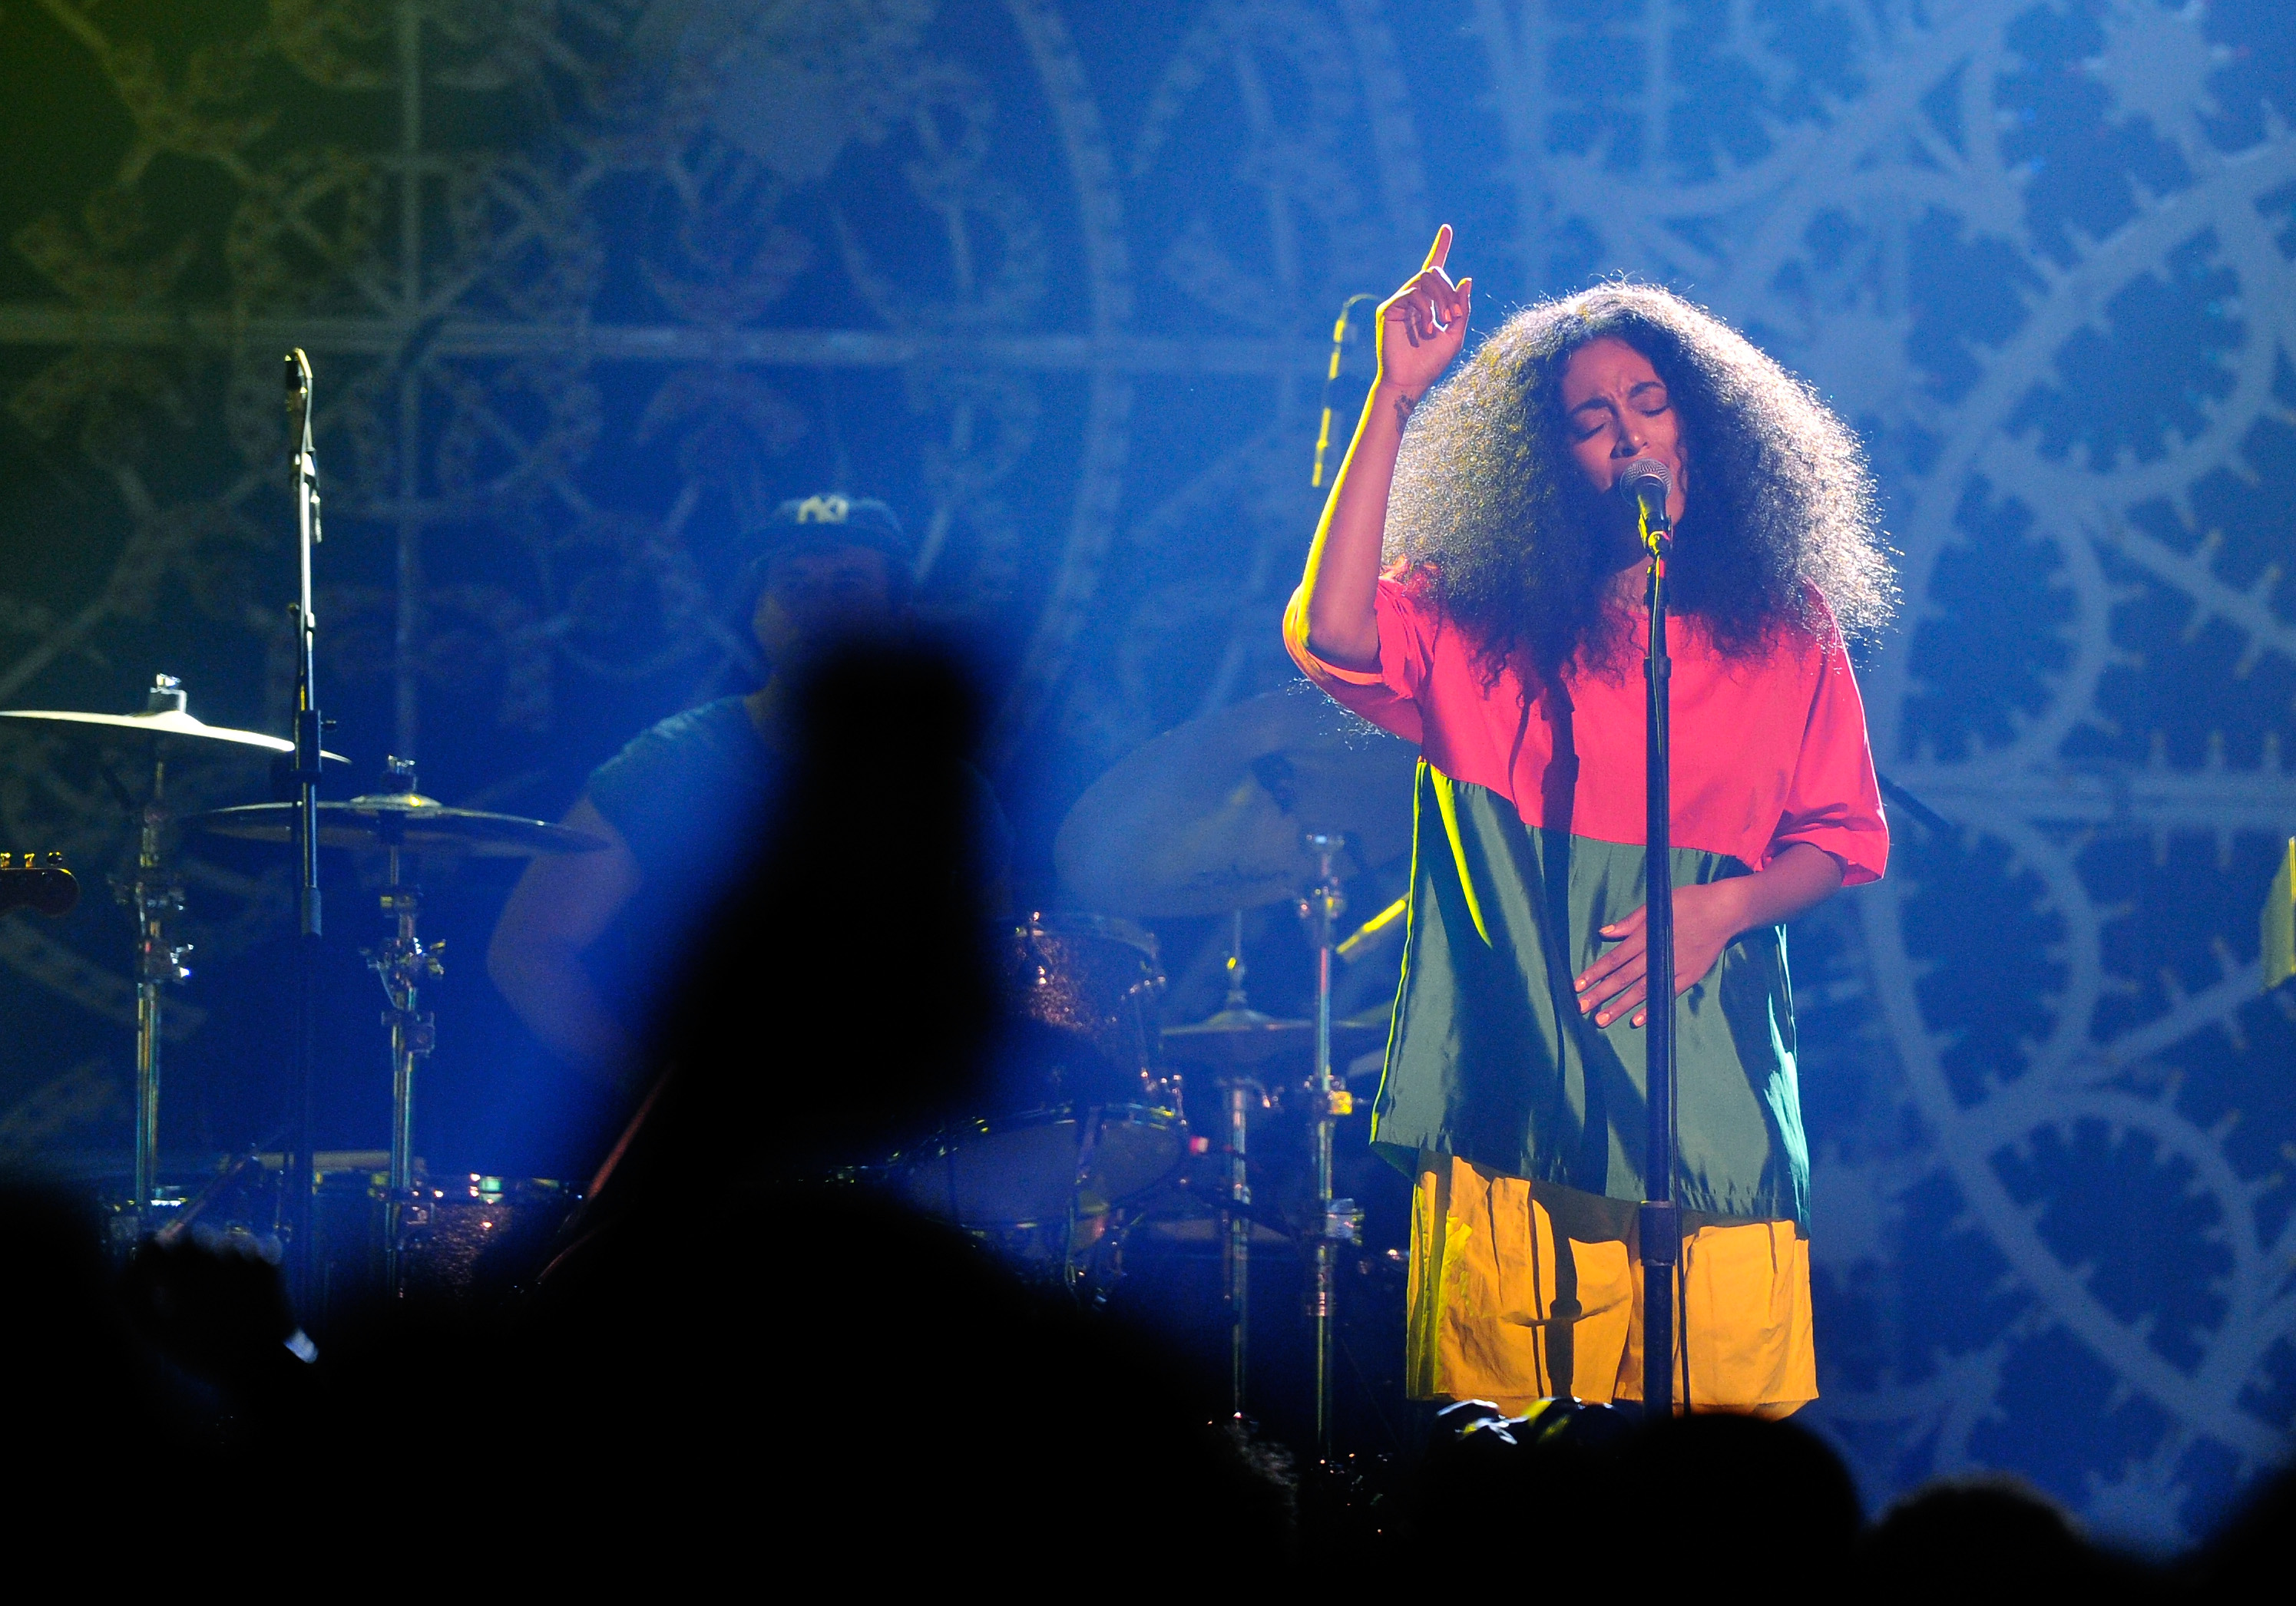 Solange performs at Webster Hall on May 10, 2014 in New York City. (Stephen Lovekin&mdash;2014 Getty Images)